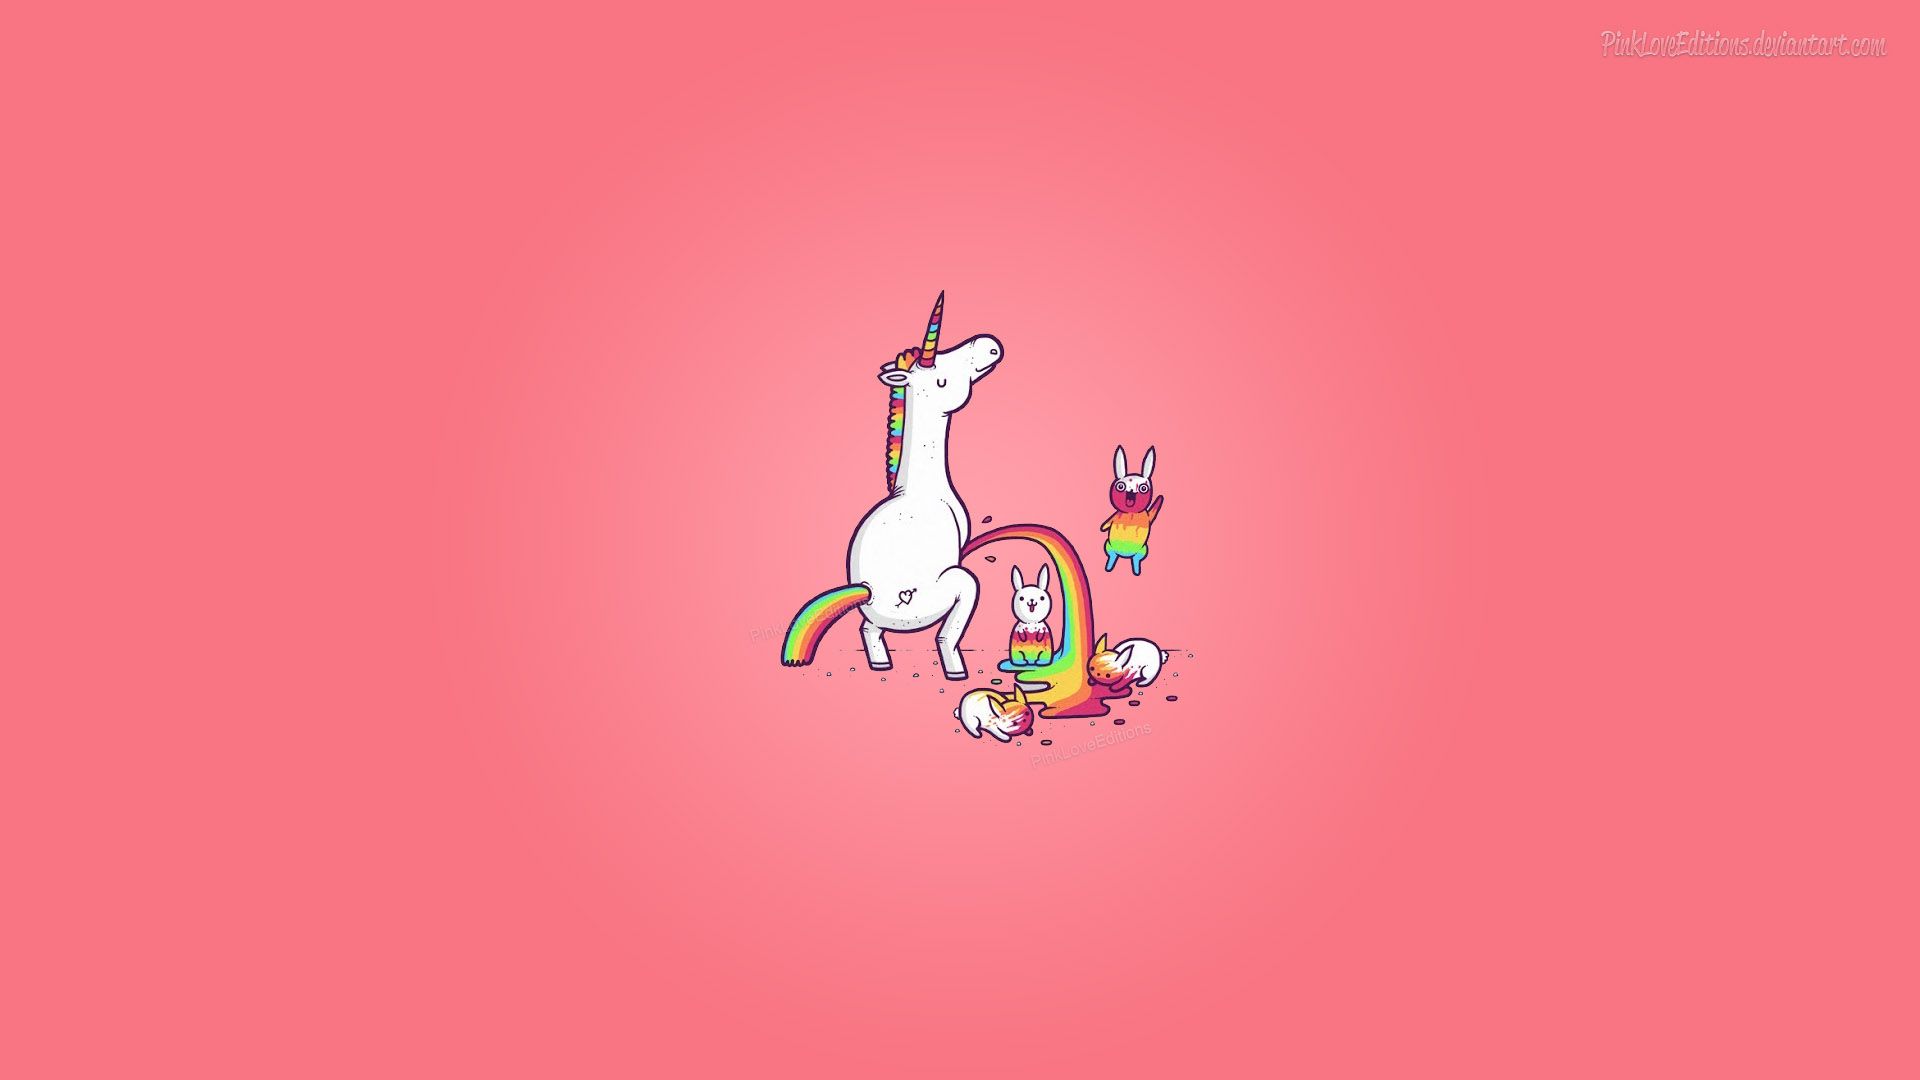 Unicorn wallpaper by pinkloveeditions on deviantart unicorn wallpaper cute tumblr wallpaper hd cute wallpapers